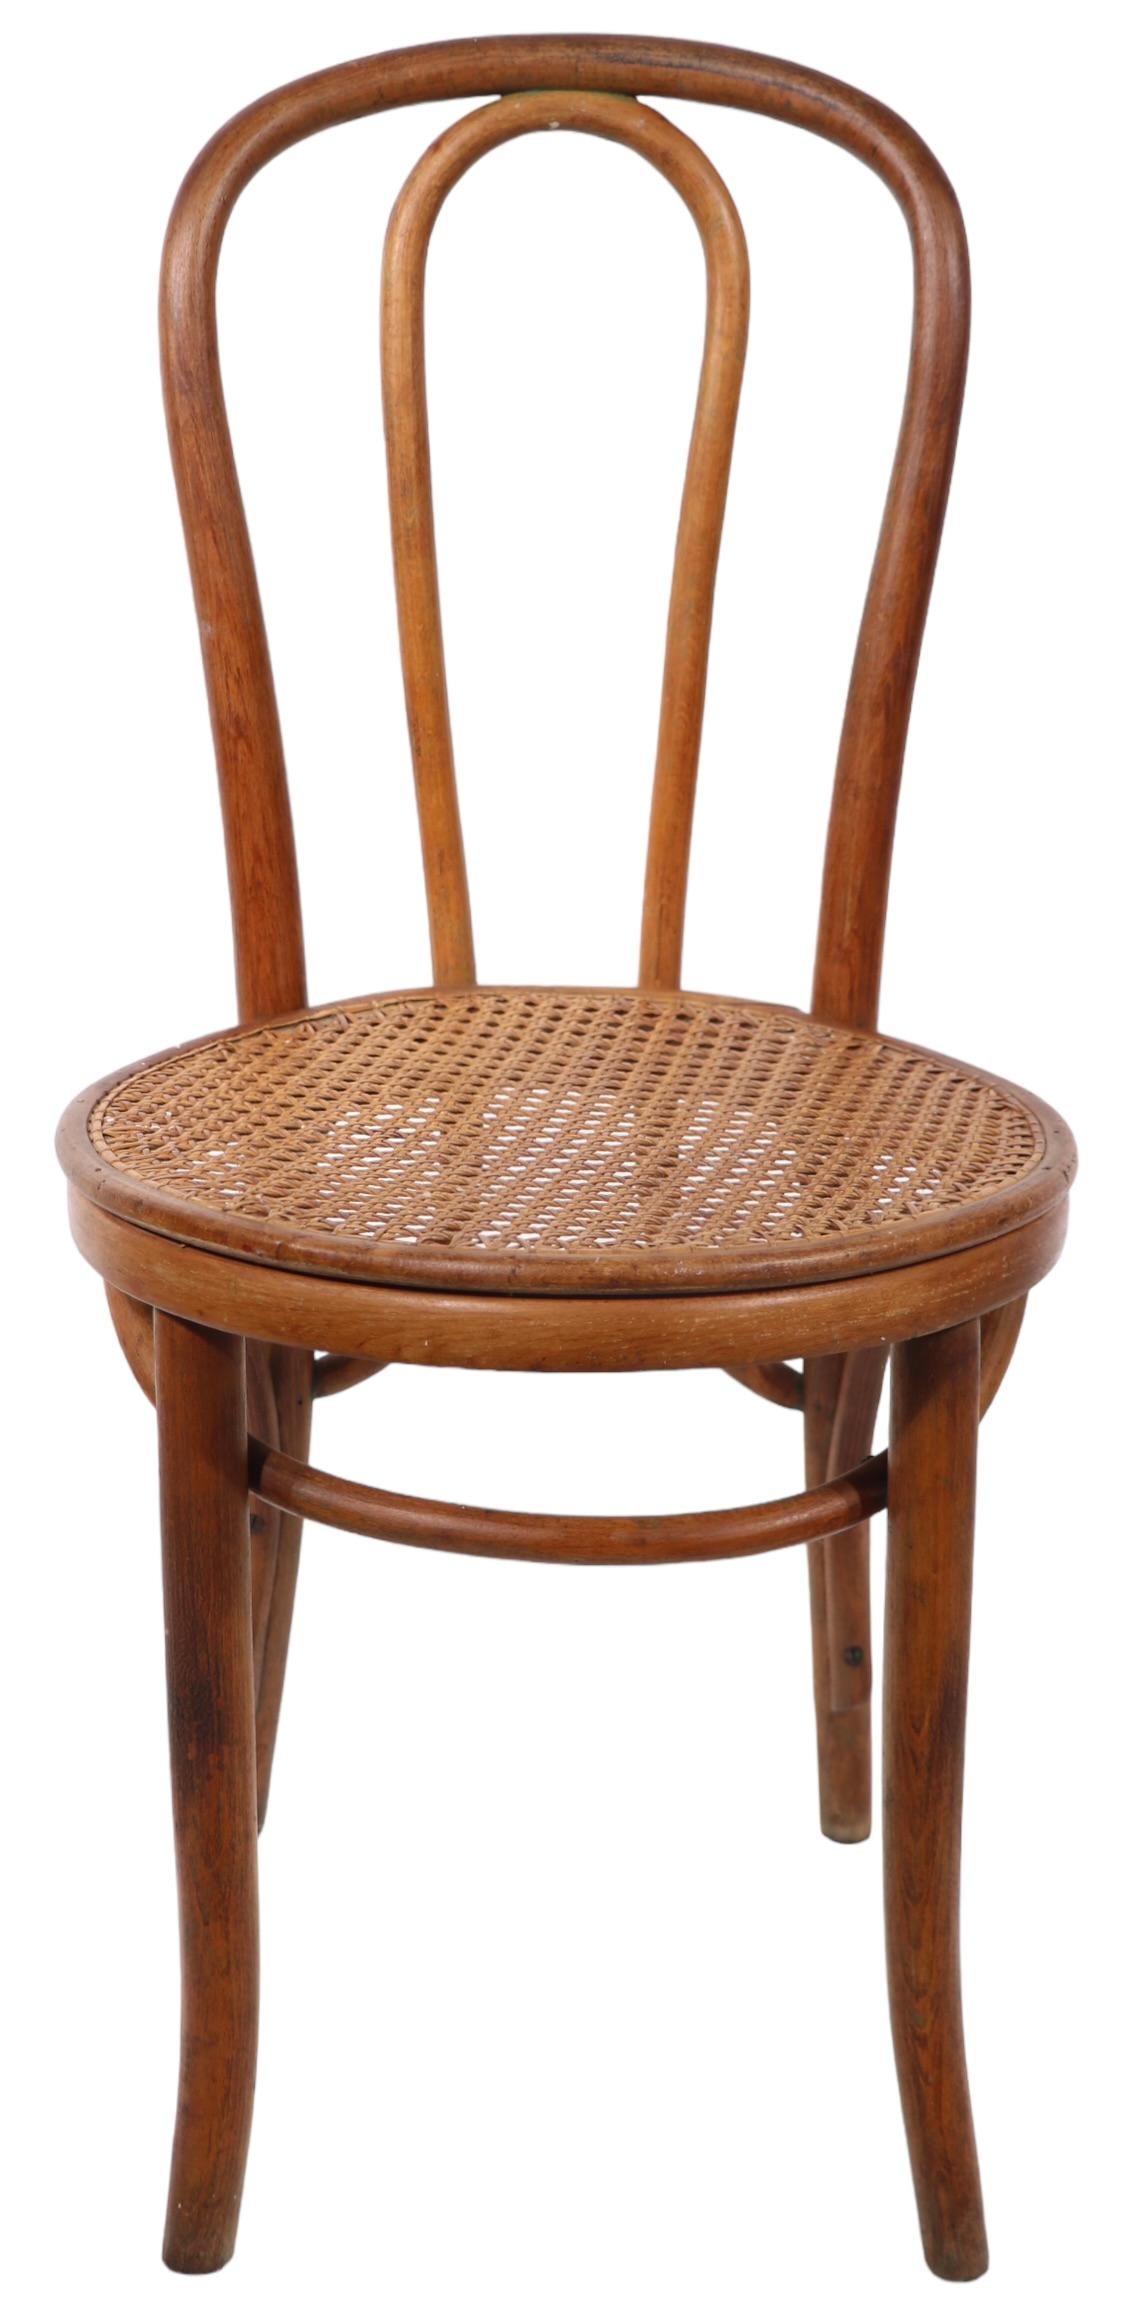 20th Century Vienna Secessionist Bentwood Chair by Kohn Mundus  For Sale